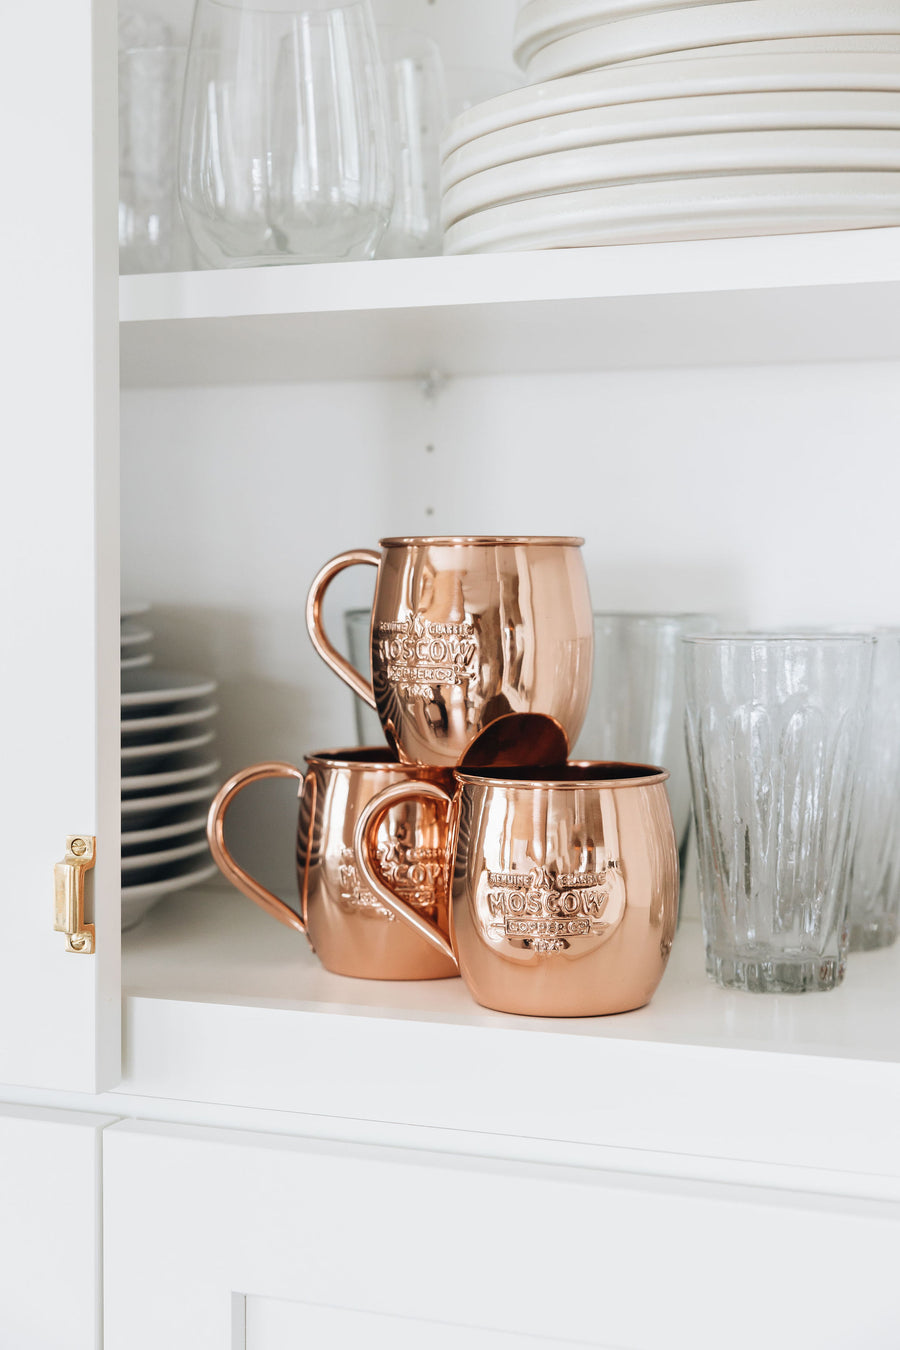 Copper Barrel Mug from Moscow Copper Co. Limited Edition!